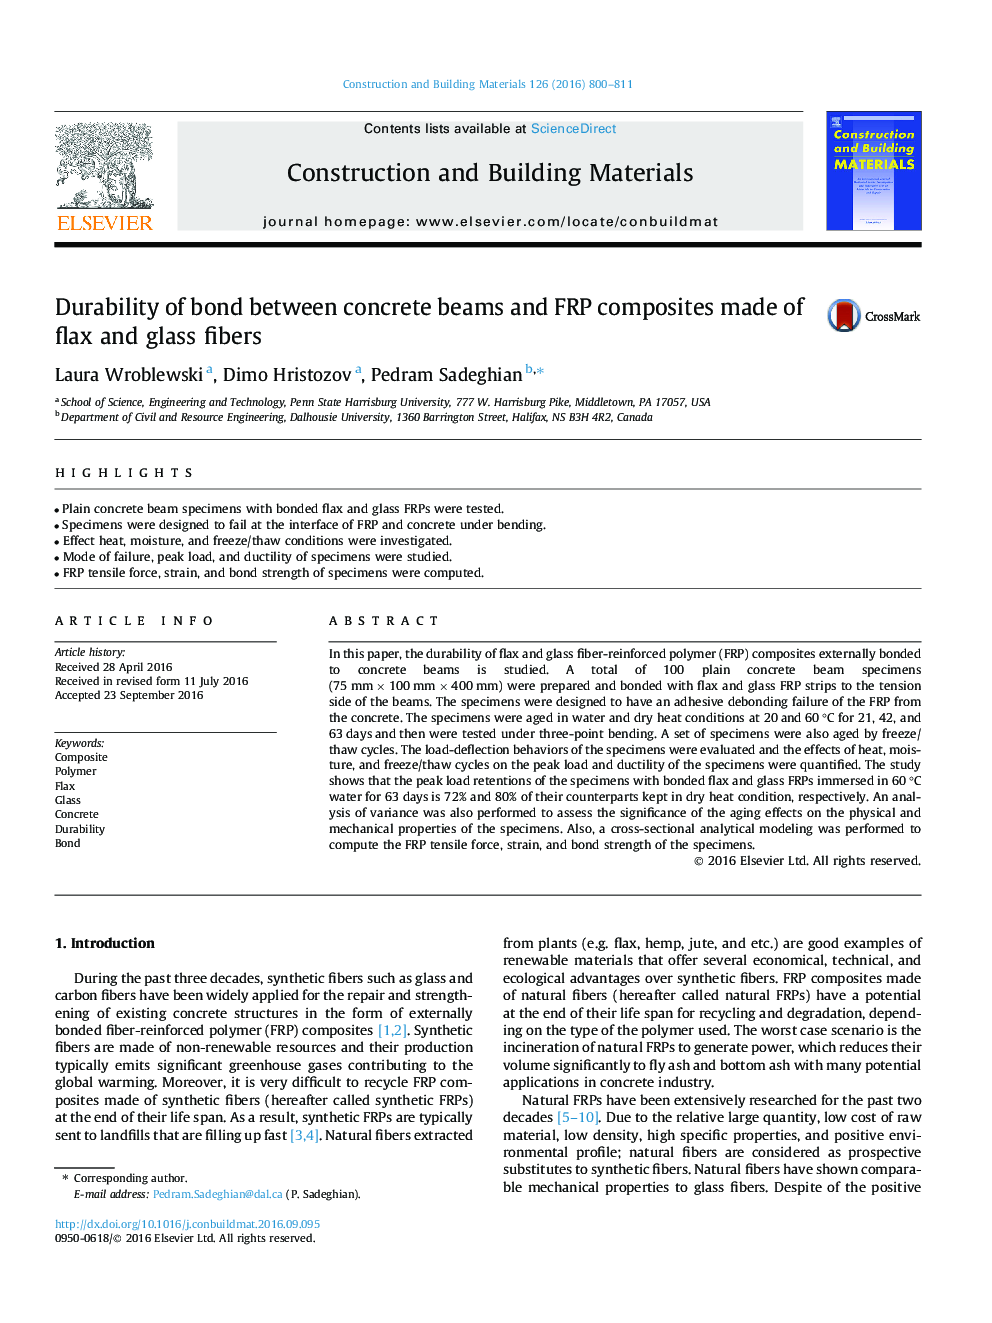 Durability of bond between concrete beams and FRP composites made of flax and glass fibers